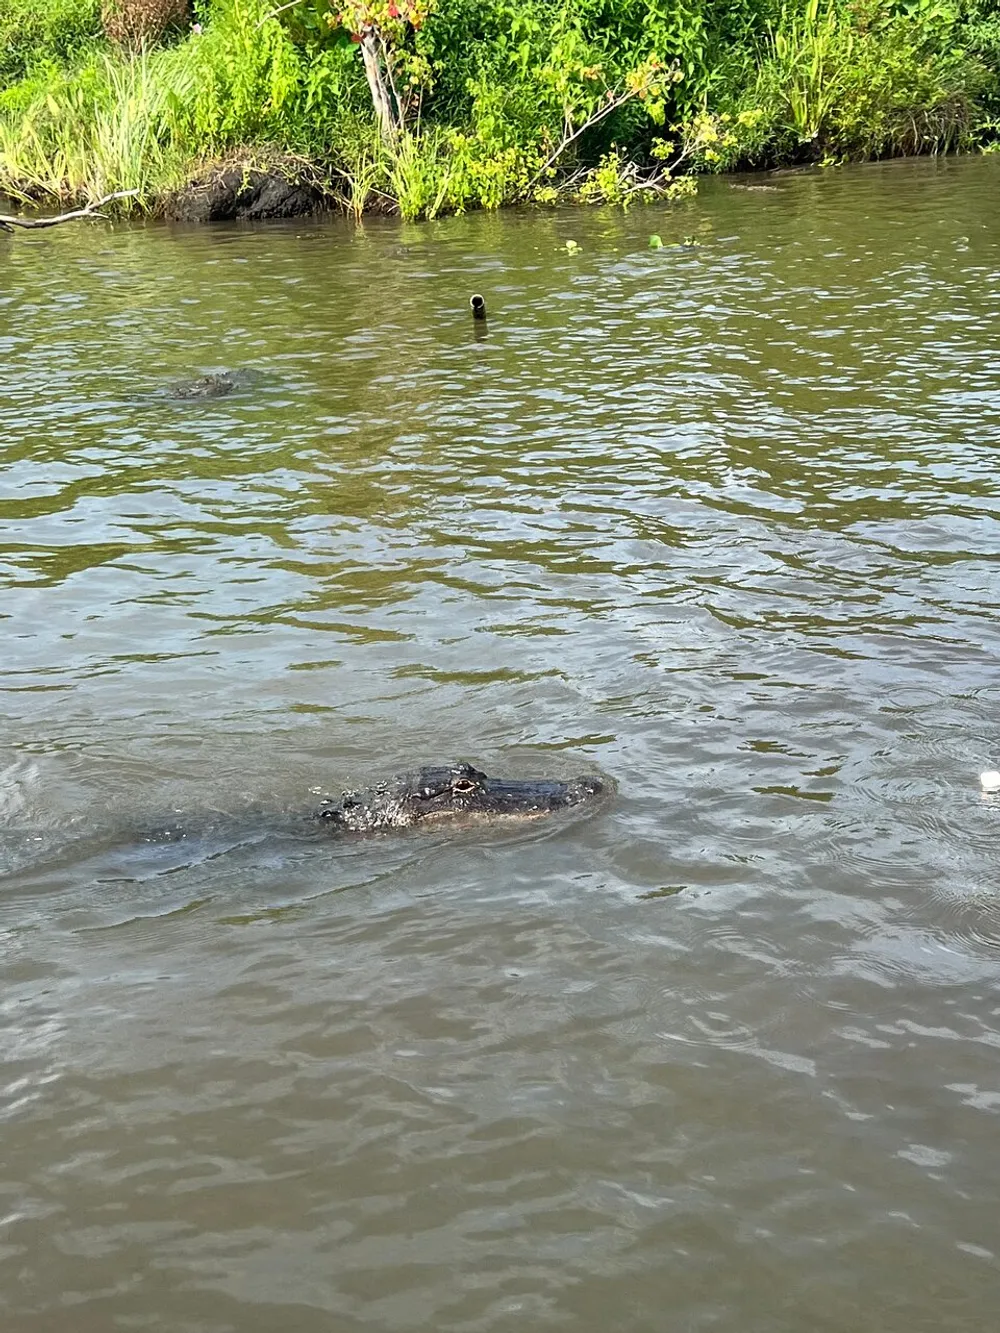 A large alligator is floating near the riverbank among green foliage